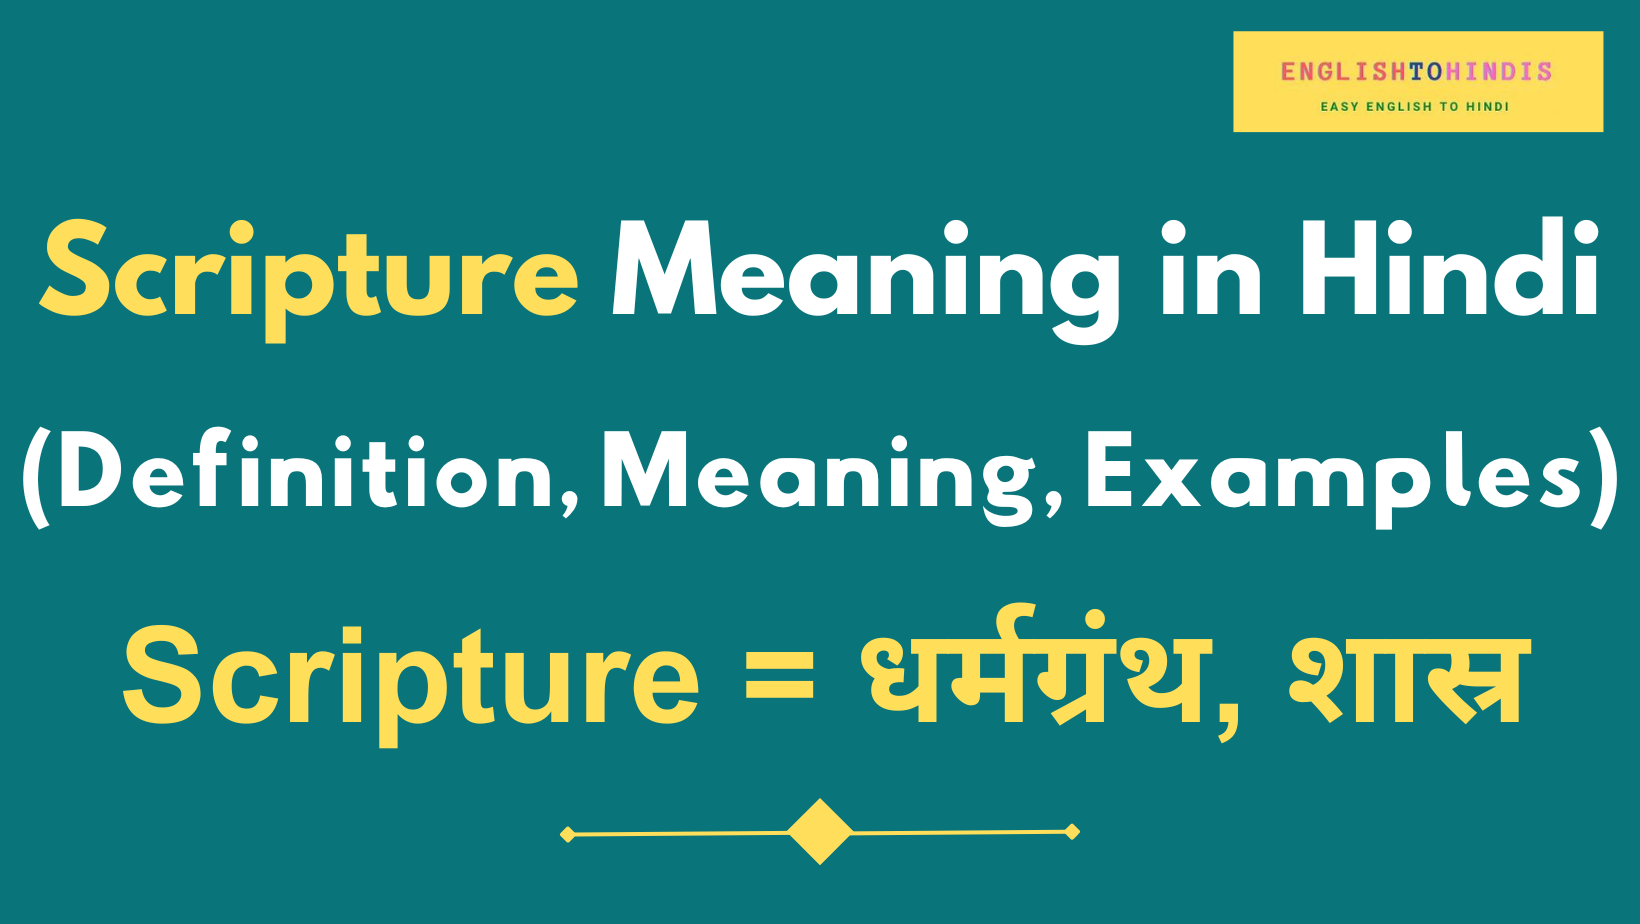 Scripture Meaning in Hindi